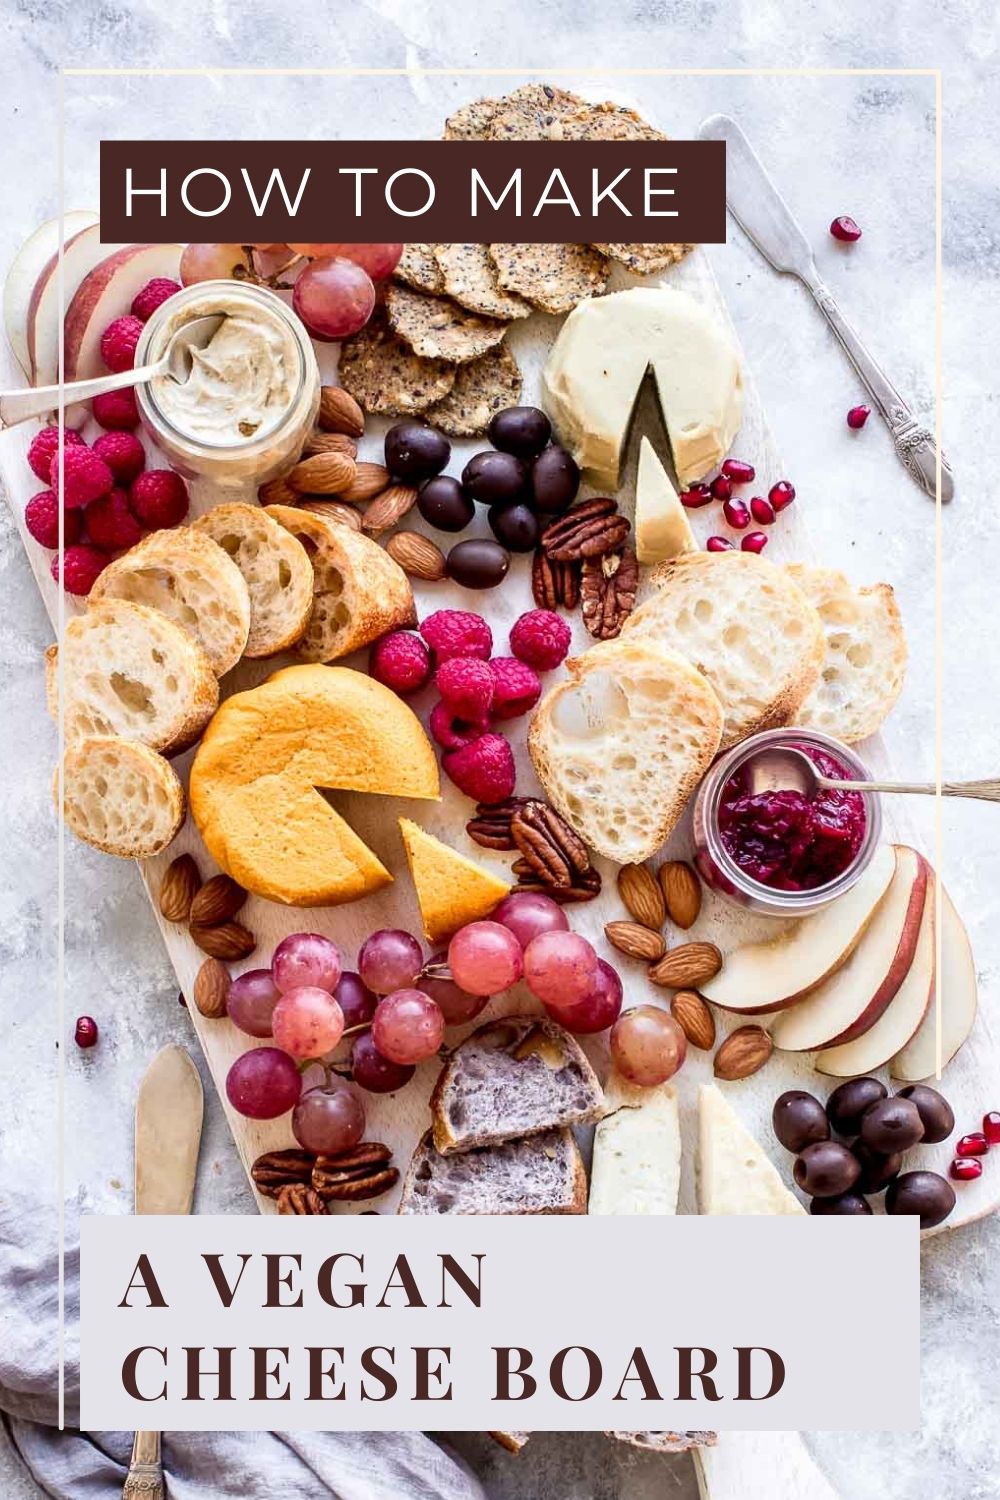 Perfect for holidays or as a party food platter, this vegan cheese board is ridiculously easy to make and can be easily customized with the ingredients you have. Can also be adapted into a vegan charcuterie board.